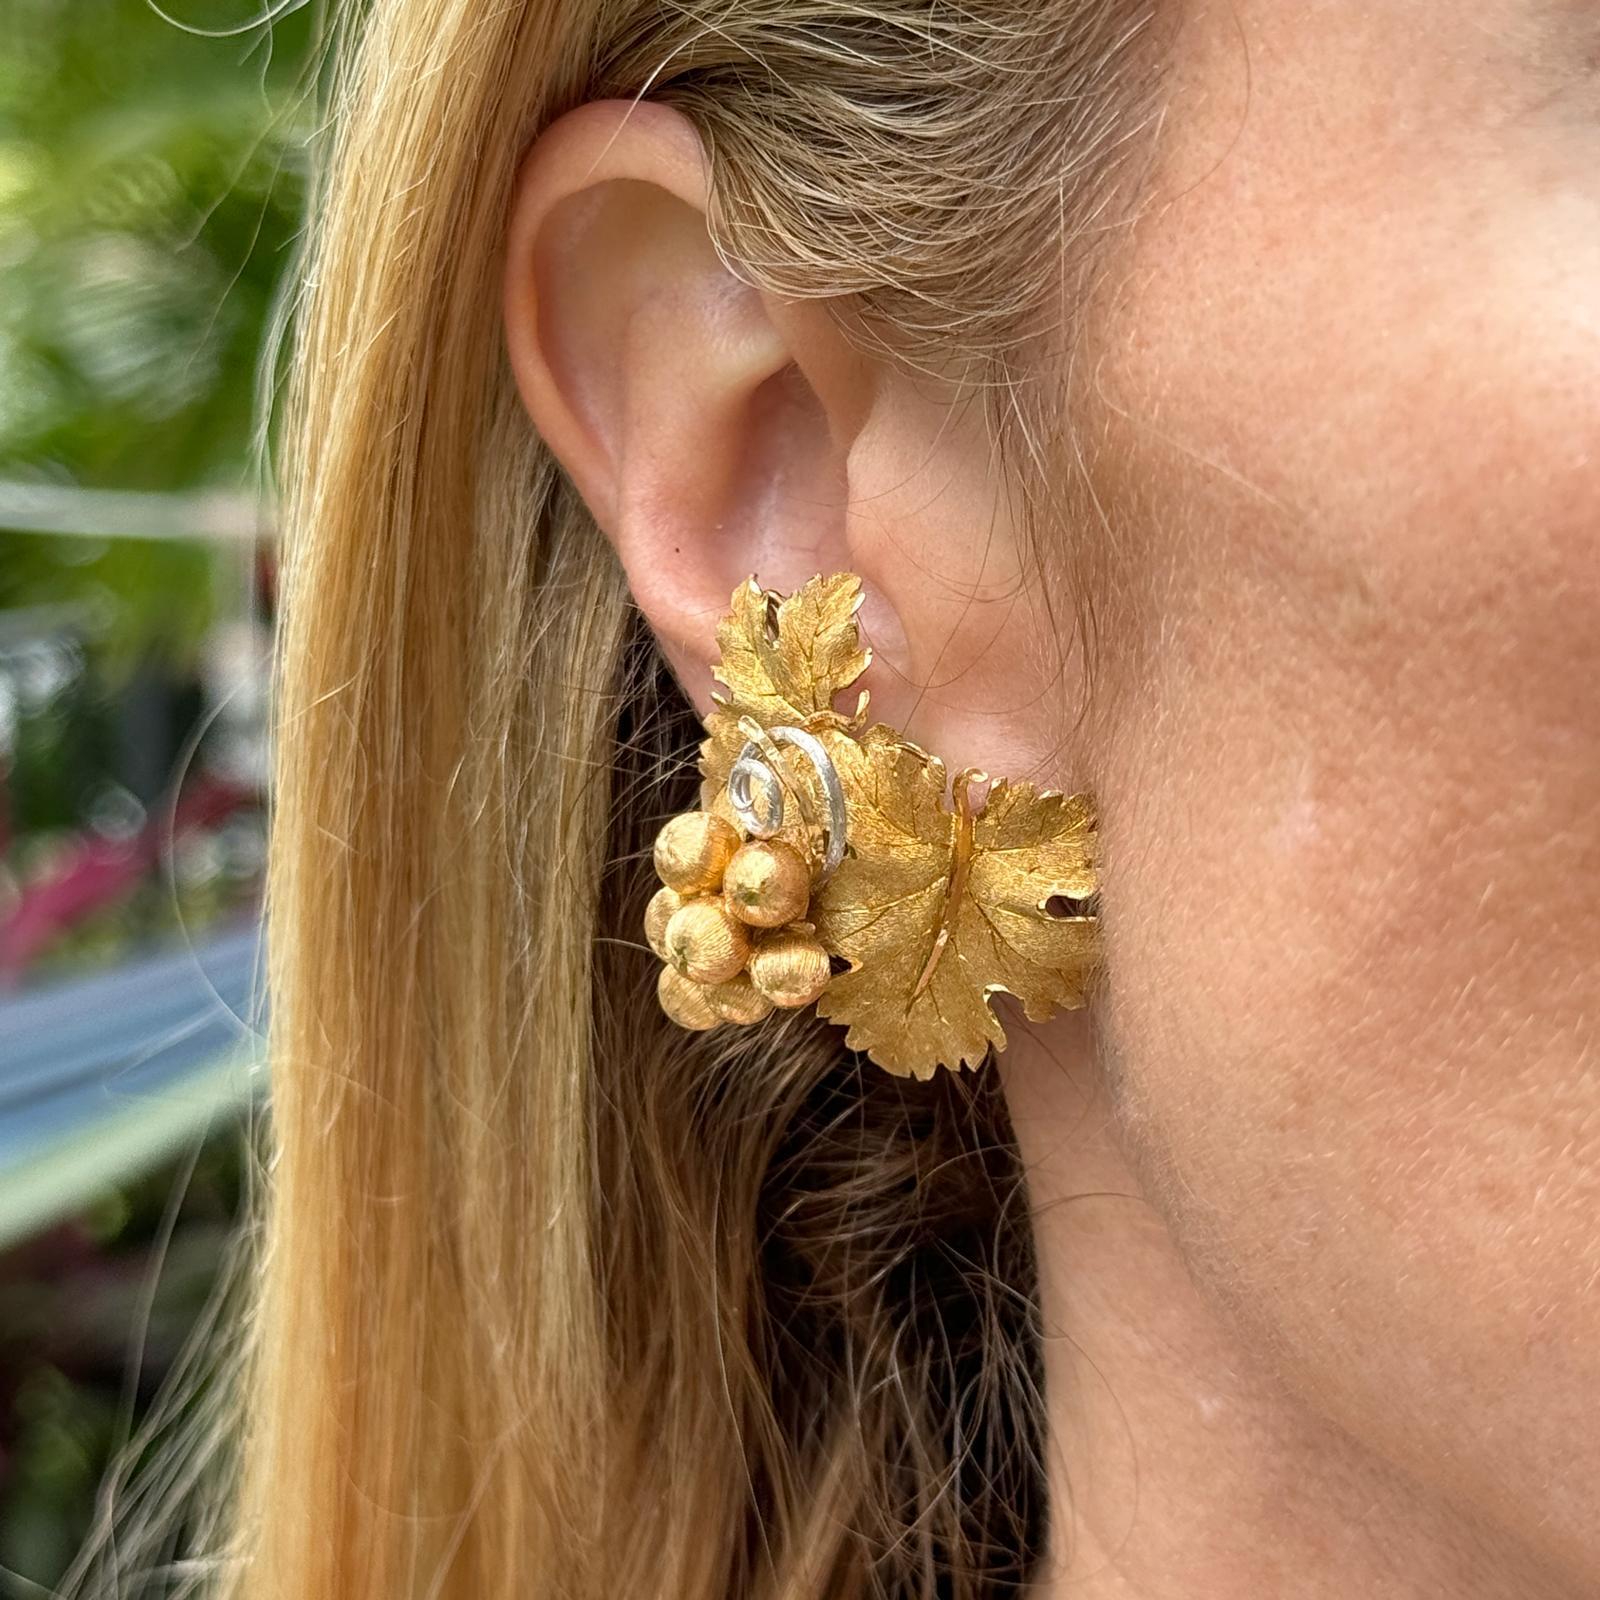 The Buccellati grape vine two-tone 18 karat gold earclip earrings are a stunning example of Buccellati's renowned craftsmanship and intricate design. These earrings are a testament to the brand's expertise in combining traditional Italian